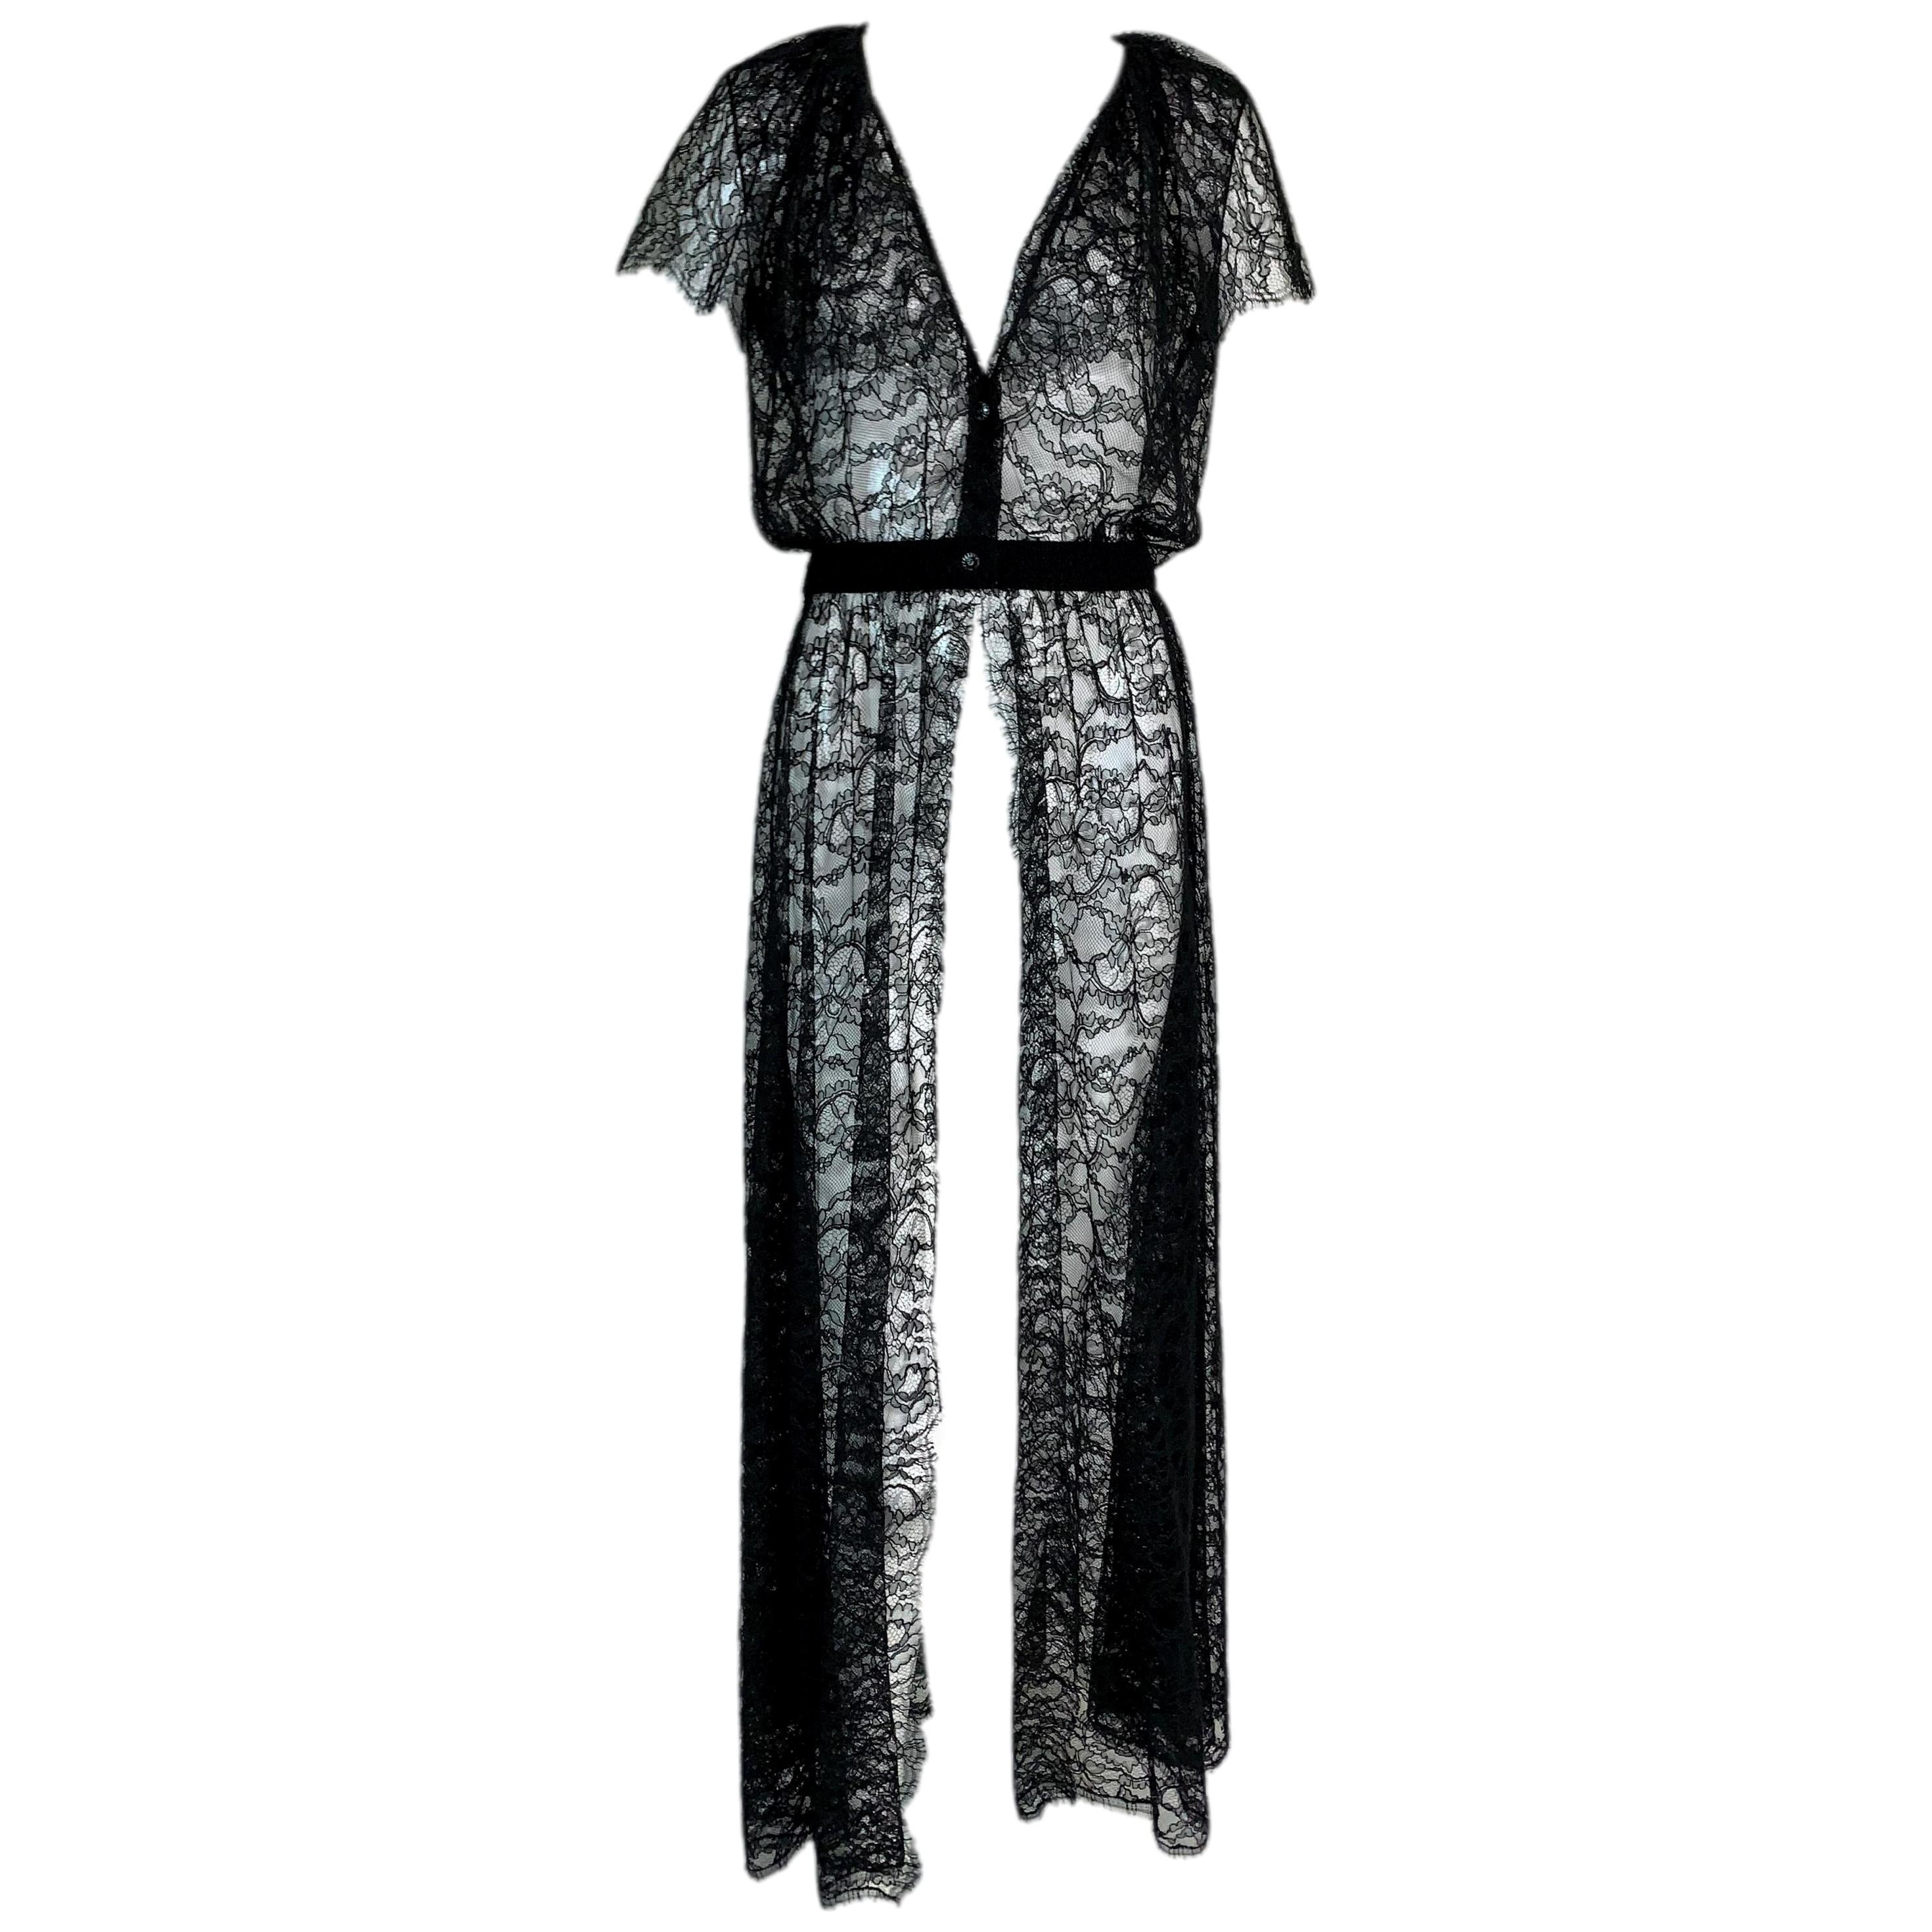 F/W 2006 Chanel 1920's Flapper Style Plunging Sheer Black Lace Dress